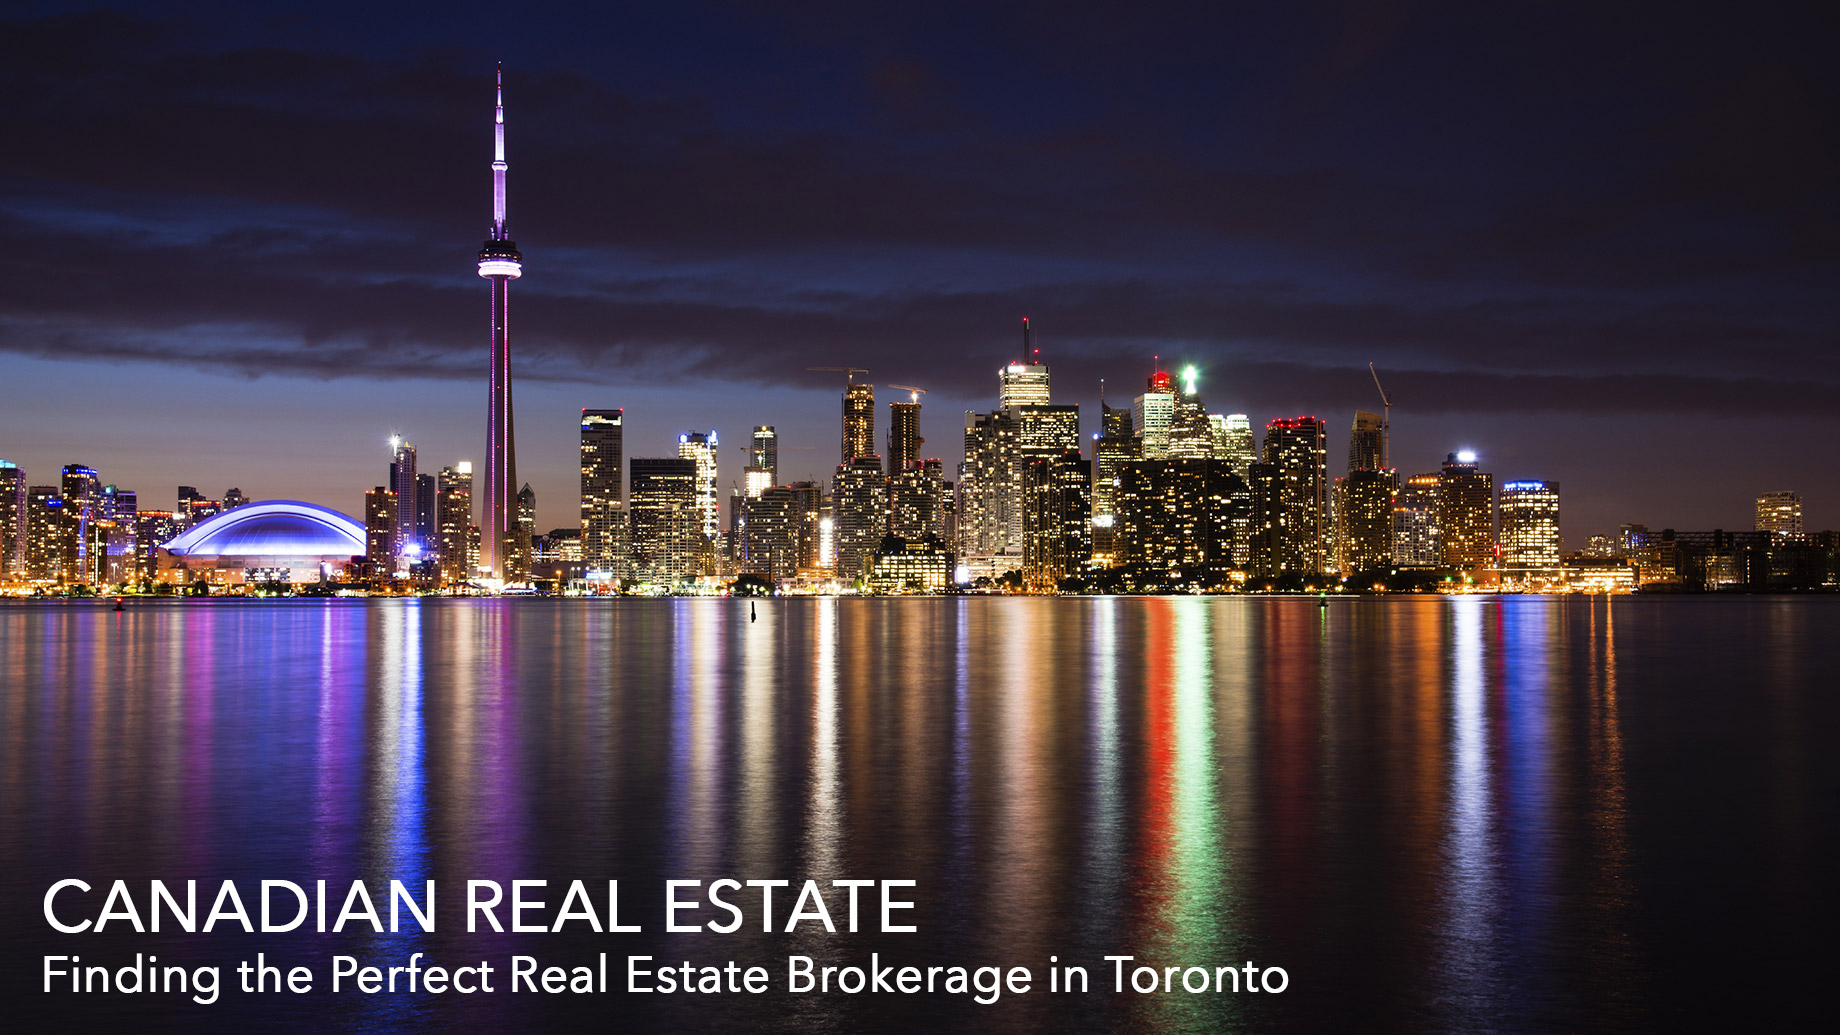 Canadian Real Estate - Finding the Perfect Real Estate Brokerage in Toronto